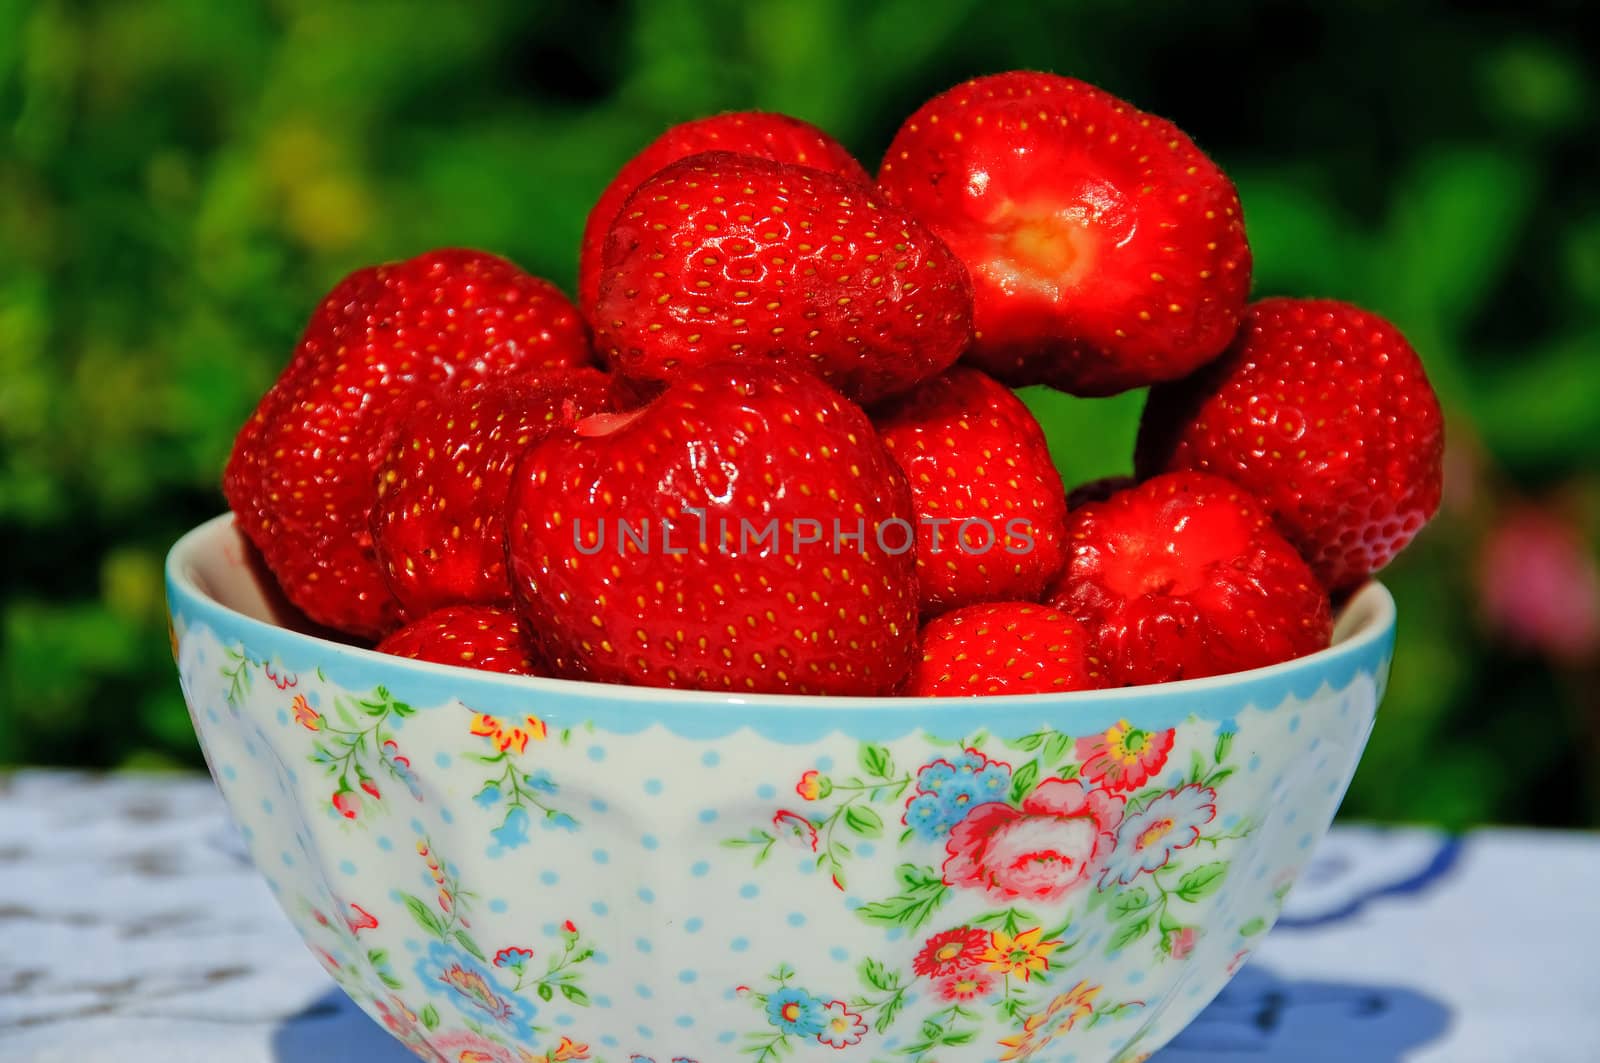 Strawberries in a bowl in a garden